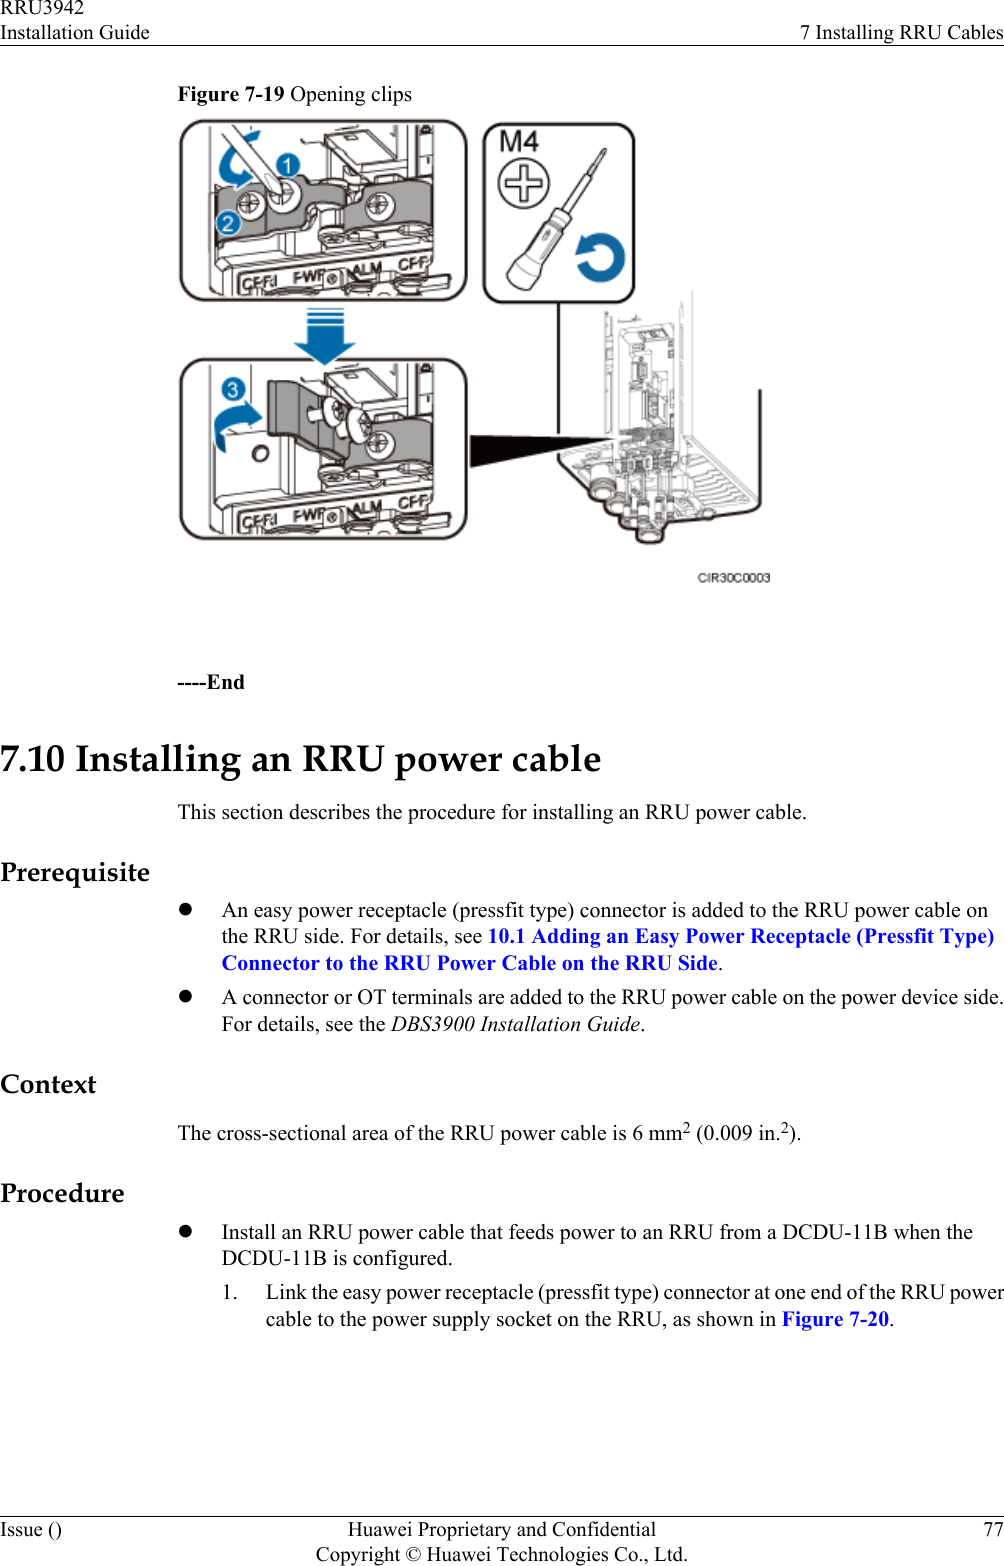 Figure 7-19 Opening clips ----End7.10 Installing an RRU power cableThis section describes the procedure for installing an RRU power cable.PrerequisitelAn easy power receptacle (pressfit type) connector is added to the RRU power cable onthe RRU side. For details, see 10.1 Adding an Easy Power Receptacle (Pressfit Type)Connector to the RRU Power Cable on the RRU Side.lA connector or OT terminals are added to the RRU power cable on the power device side.For details, see the DBS3900 Installation Guide.ContextThe cross-sectional area of the RRU power cable is 6 mm2 (0.009 in.2).ProcedurelInstall an RRU power cable that feeds power to an RRU from a DCDU-11B when theDCDU-11B is configured.1. Link the easy power receptacle (pressfit type) connector at one end of the RRU powercable to the power supply socket on the RRU, as shown in Figure 7-20.RRU3942Installation Guide 7 Installing RRU CablesIssue () Huawei Proprietary and ConfidentialCopyright © Huawei Technologies Co., Ltd.77